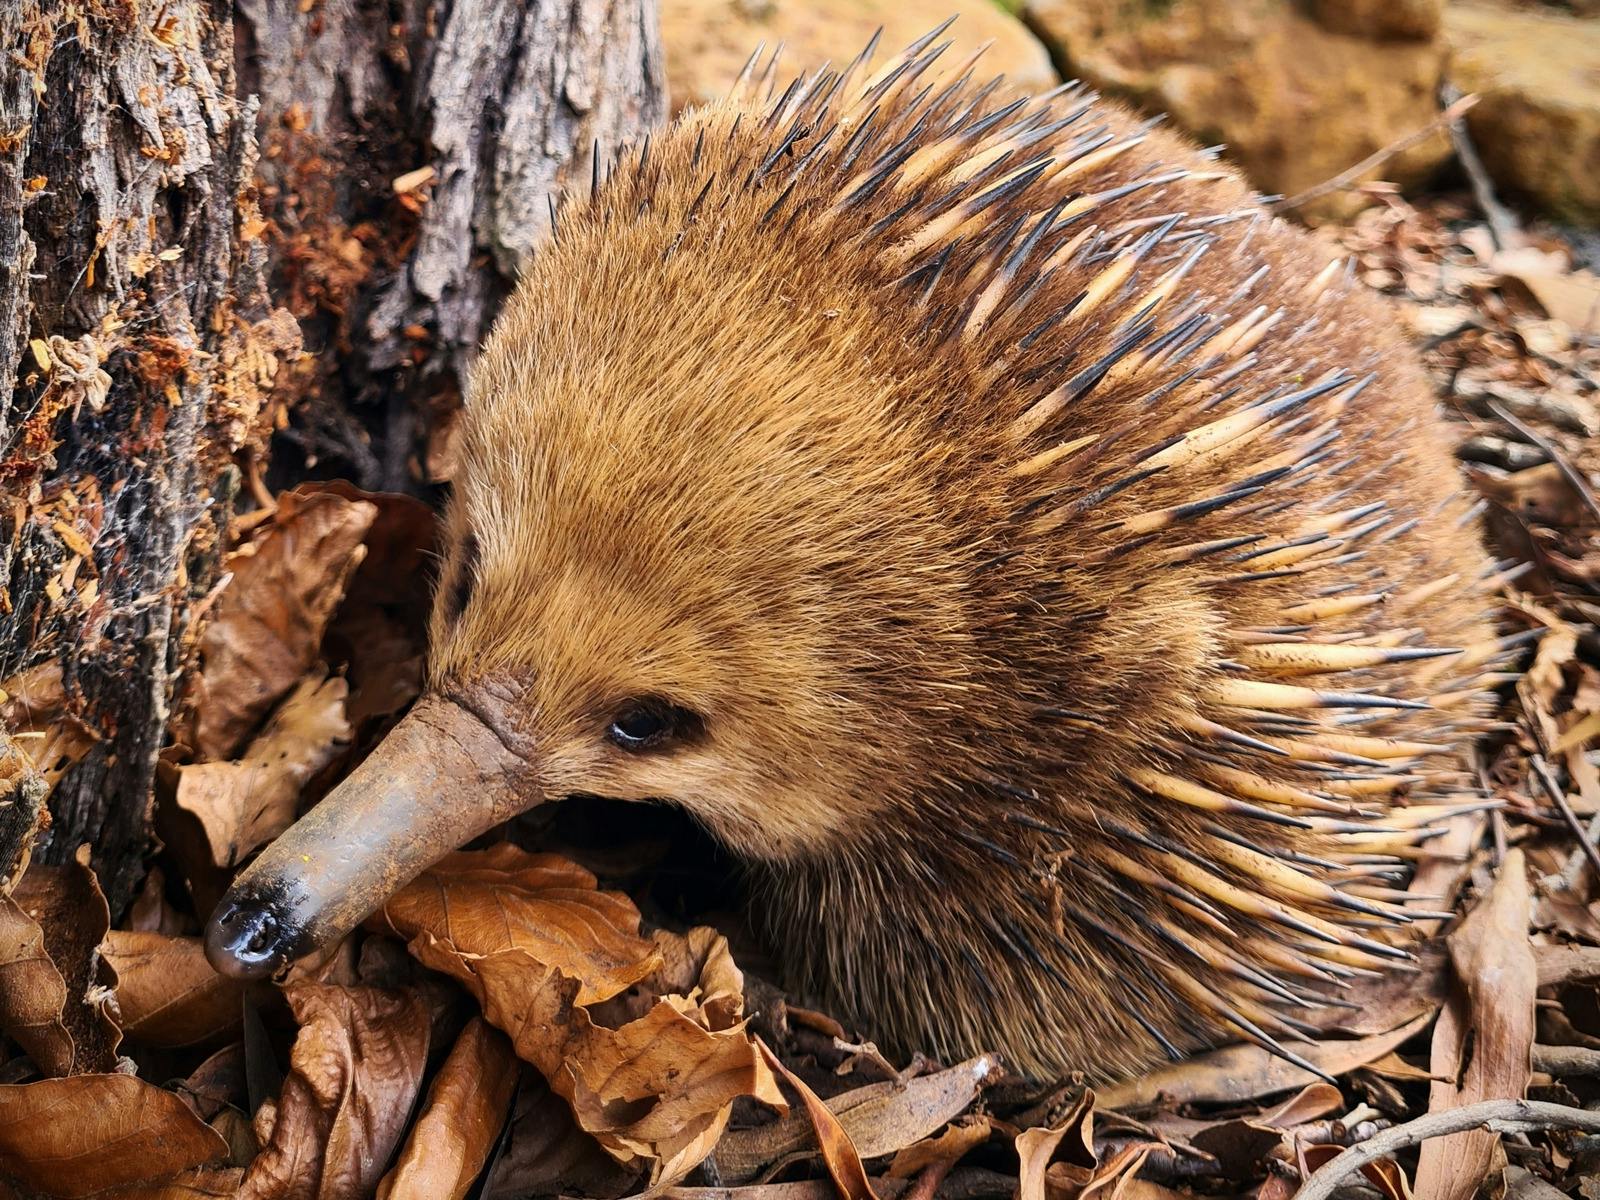 Spike the Echidna at EVRG